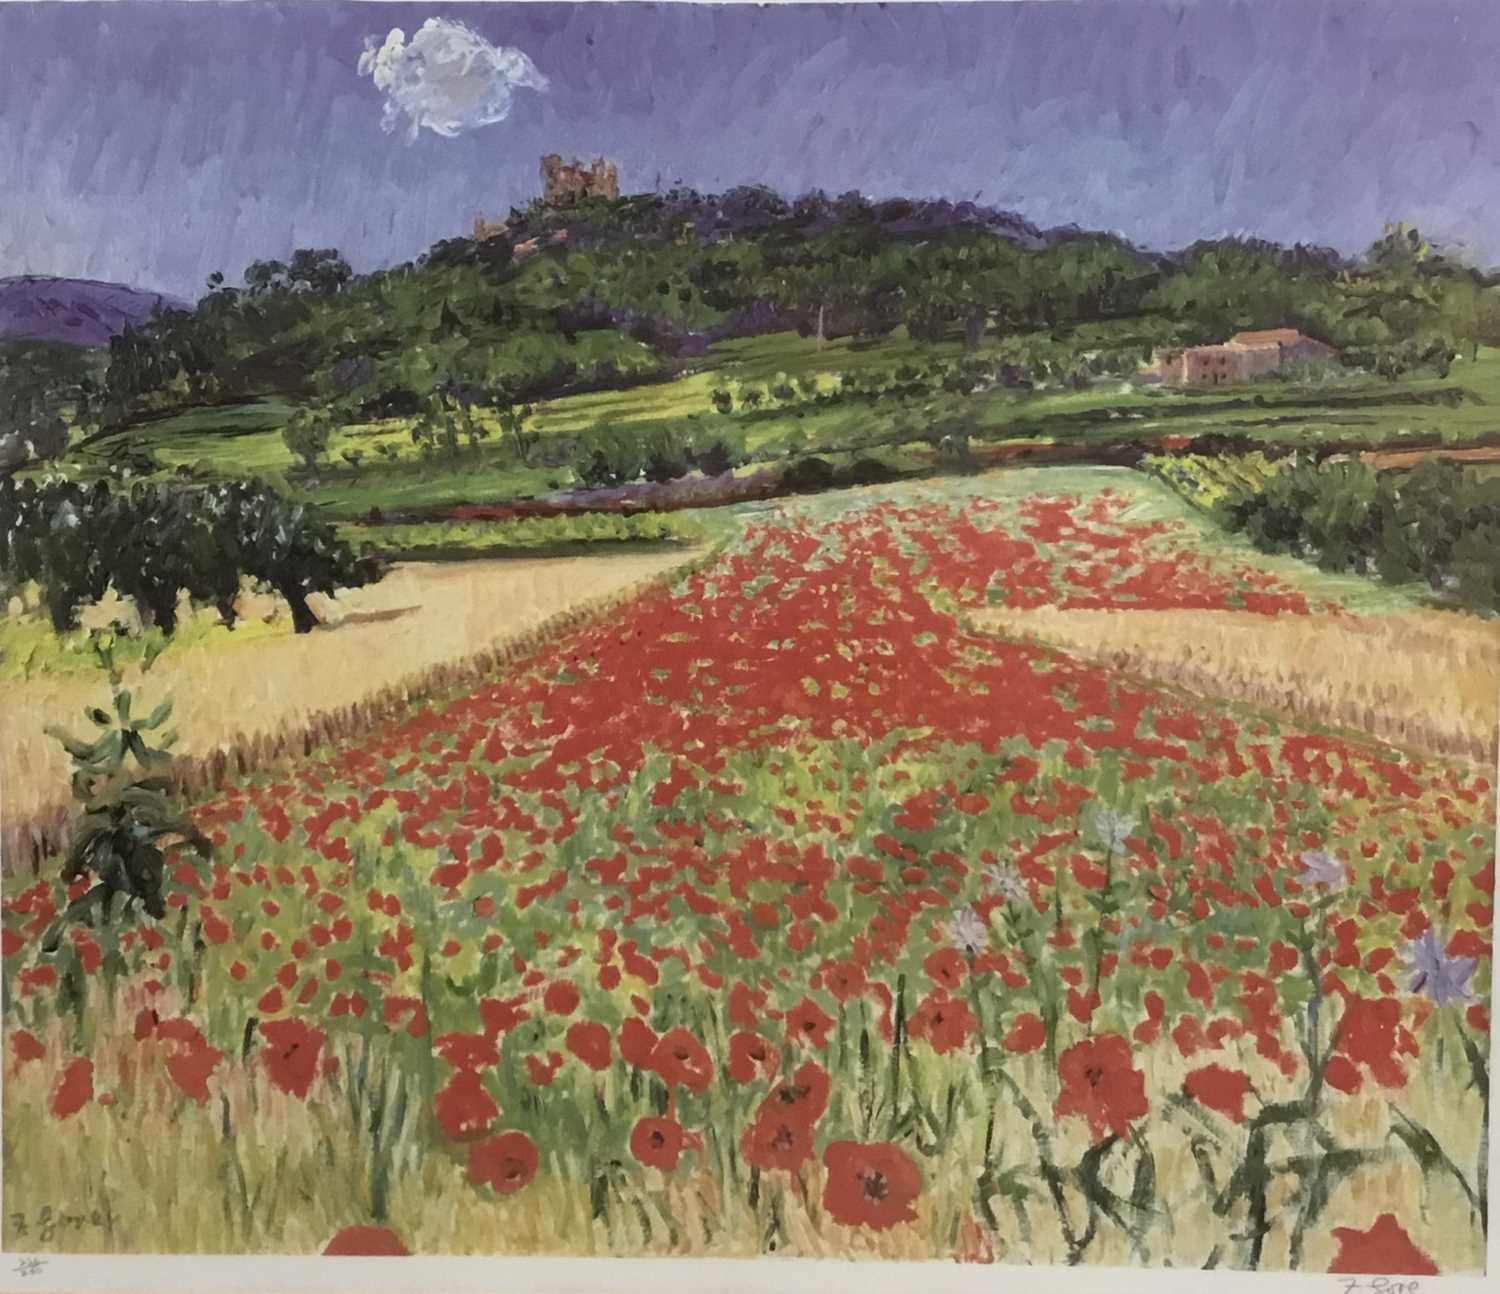 Lot 49 - Frederick Gore (1919-2003) lithographic print, Continental landscape with poppies, Lacoste, signed and numbered 226/250, image 60 x 71cm, glazed frame